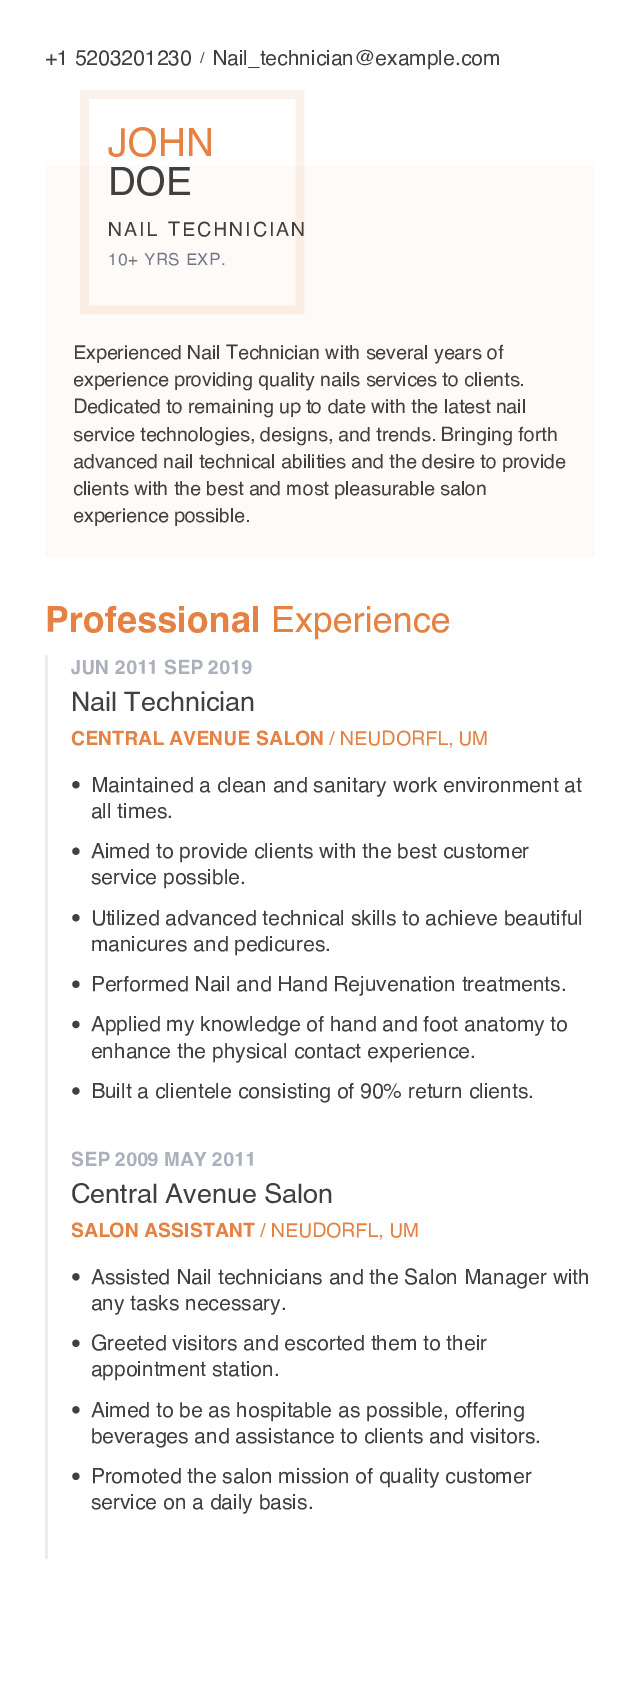 Nail Technician Resume Example With Content Sample | CraftmyCV